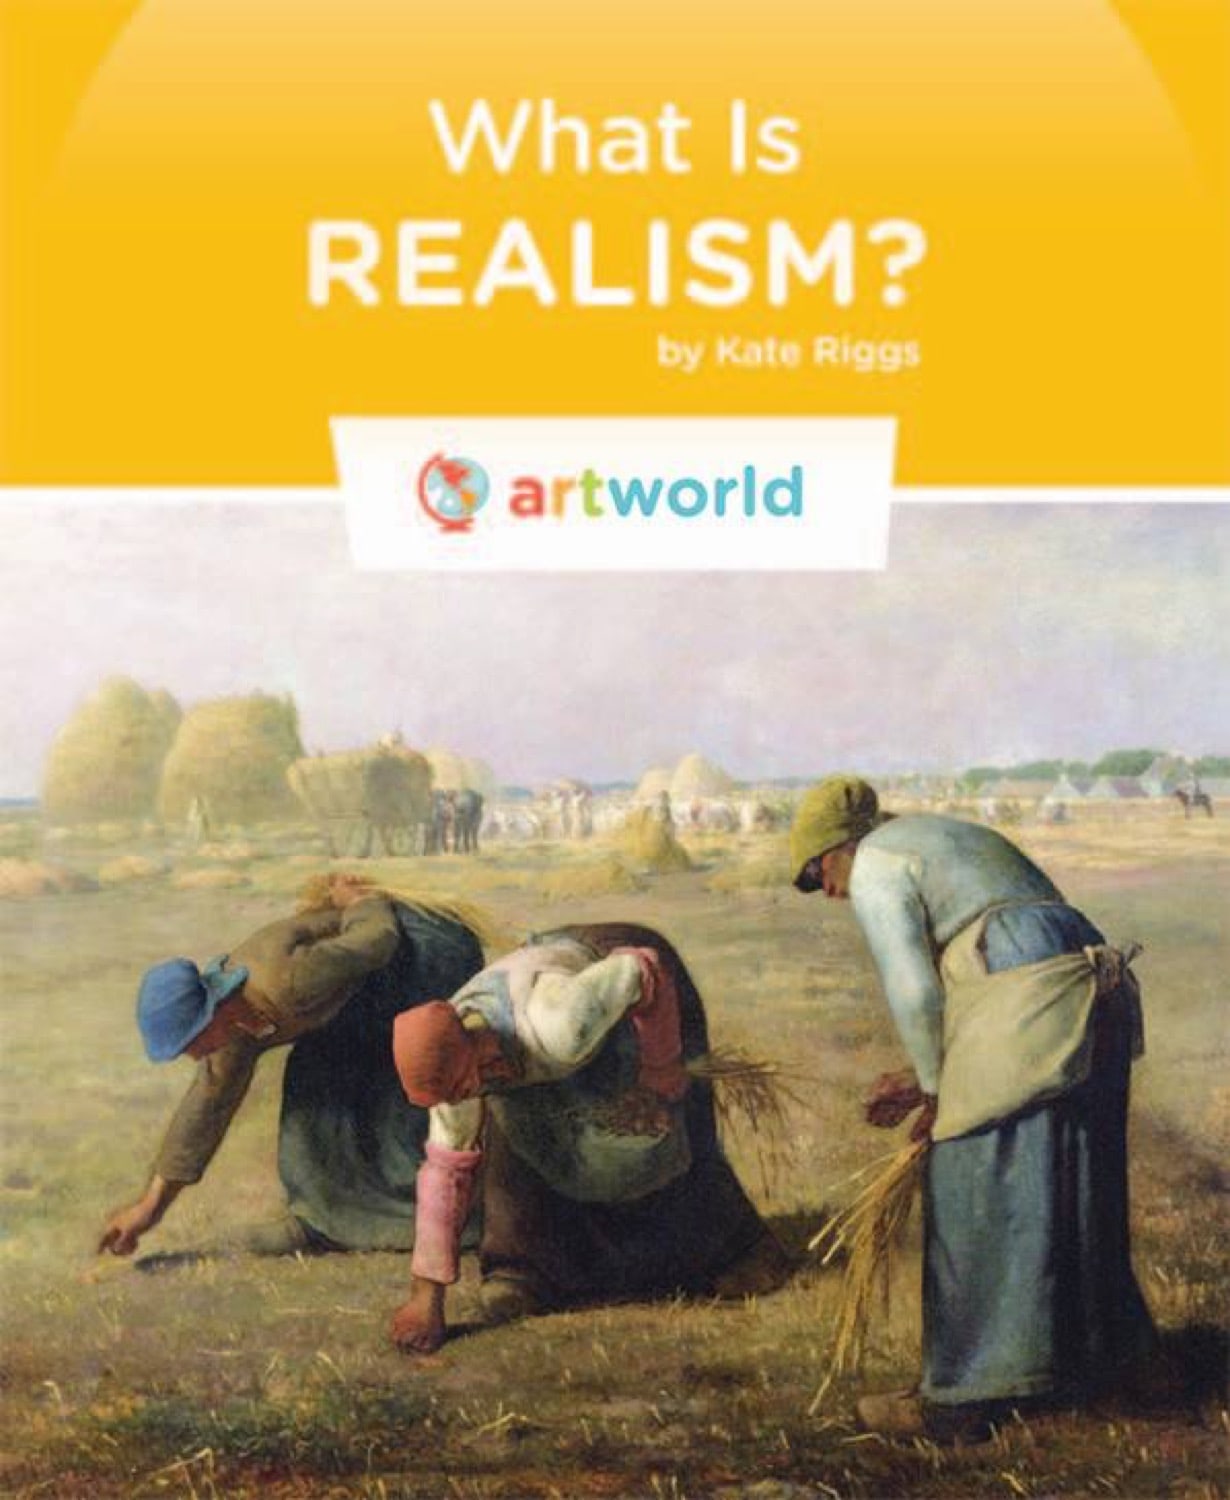 Art World: What Is Realism?